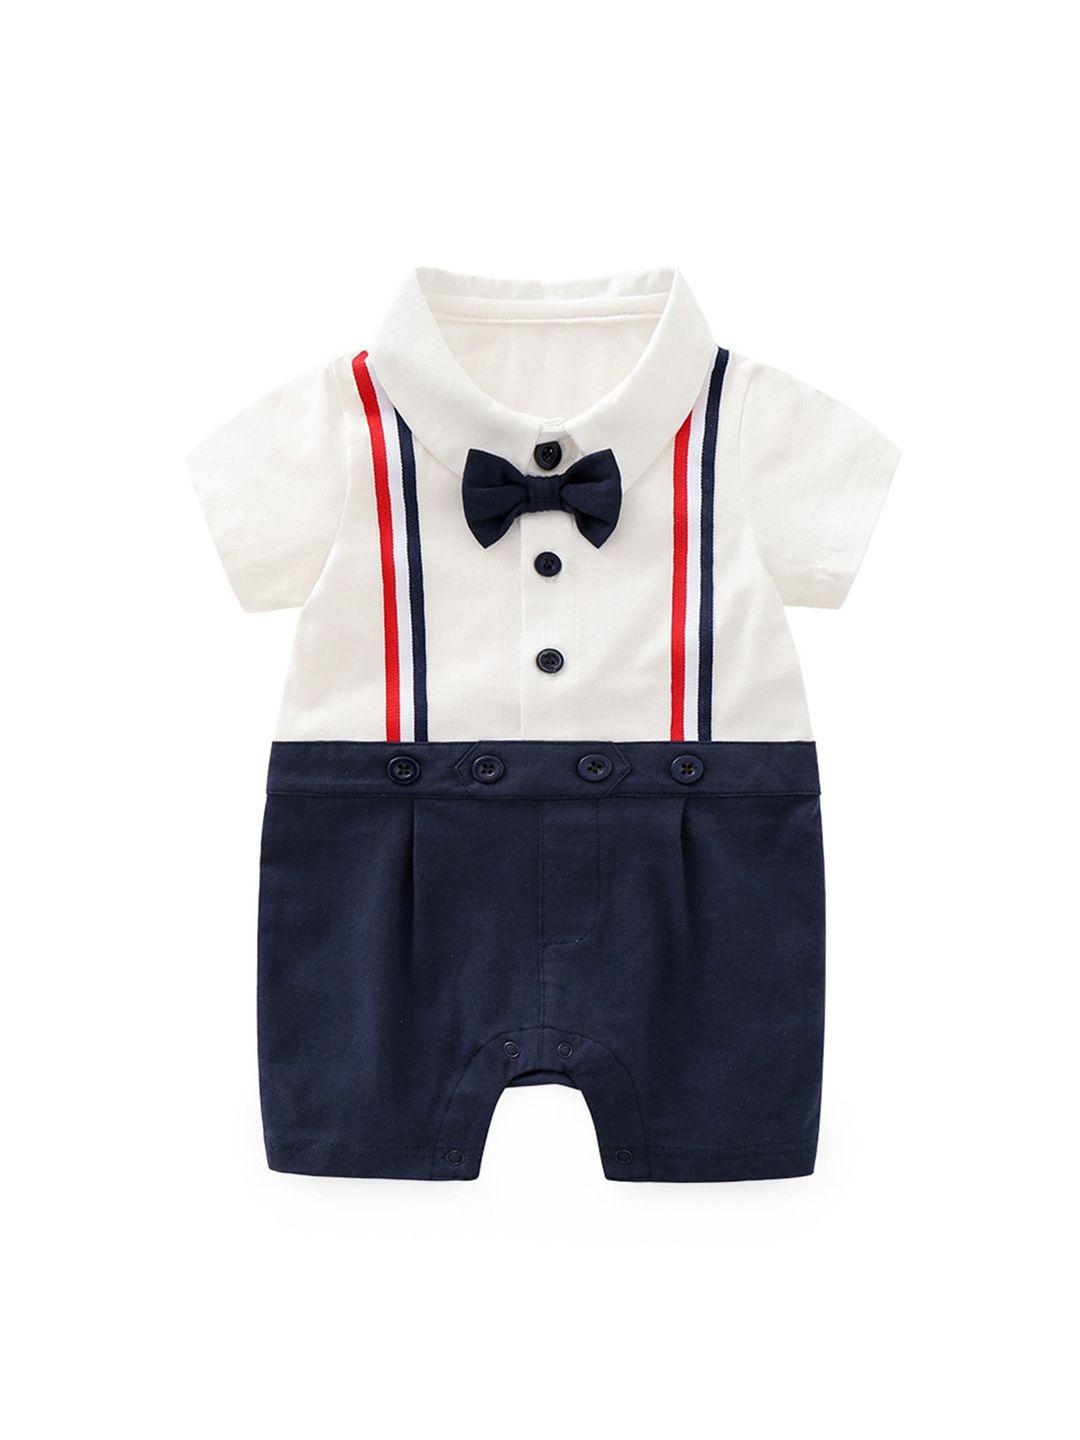 stylecast navy blue infants boys cotton rompers with aattached bow